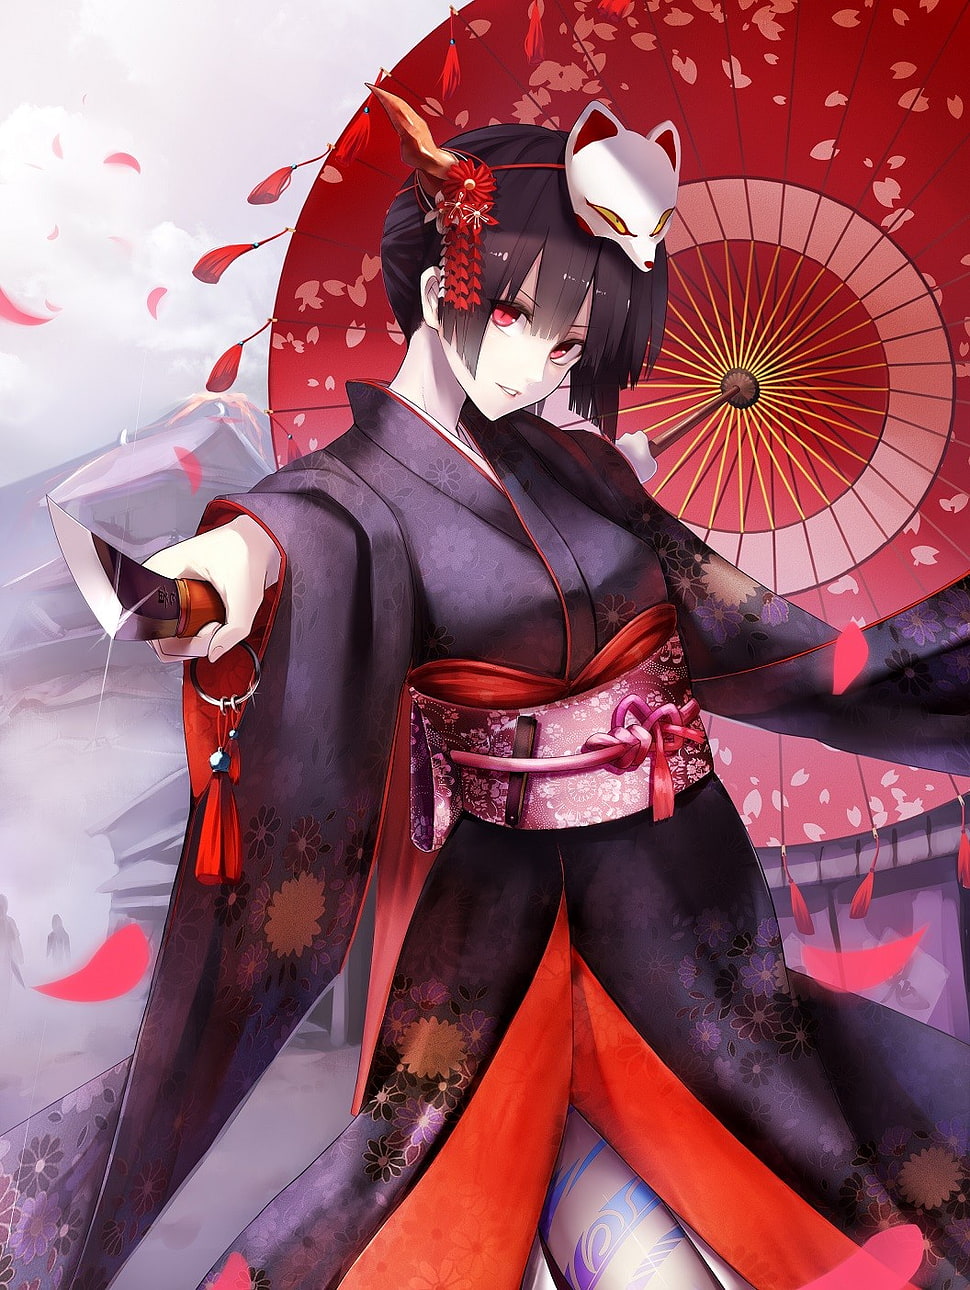 Black haired female anime character with red umbrella and traditional ...